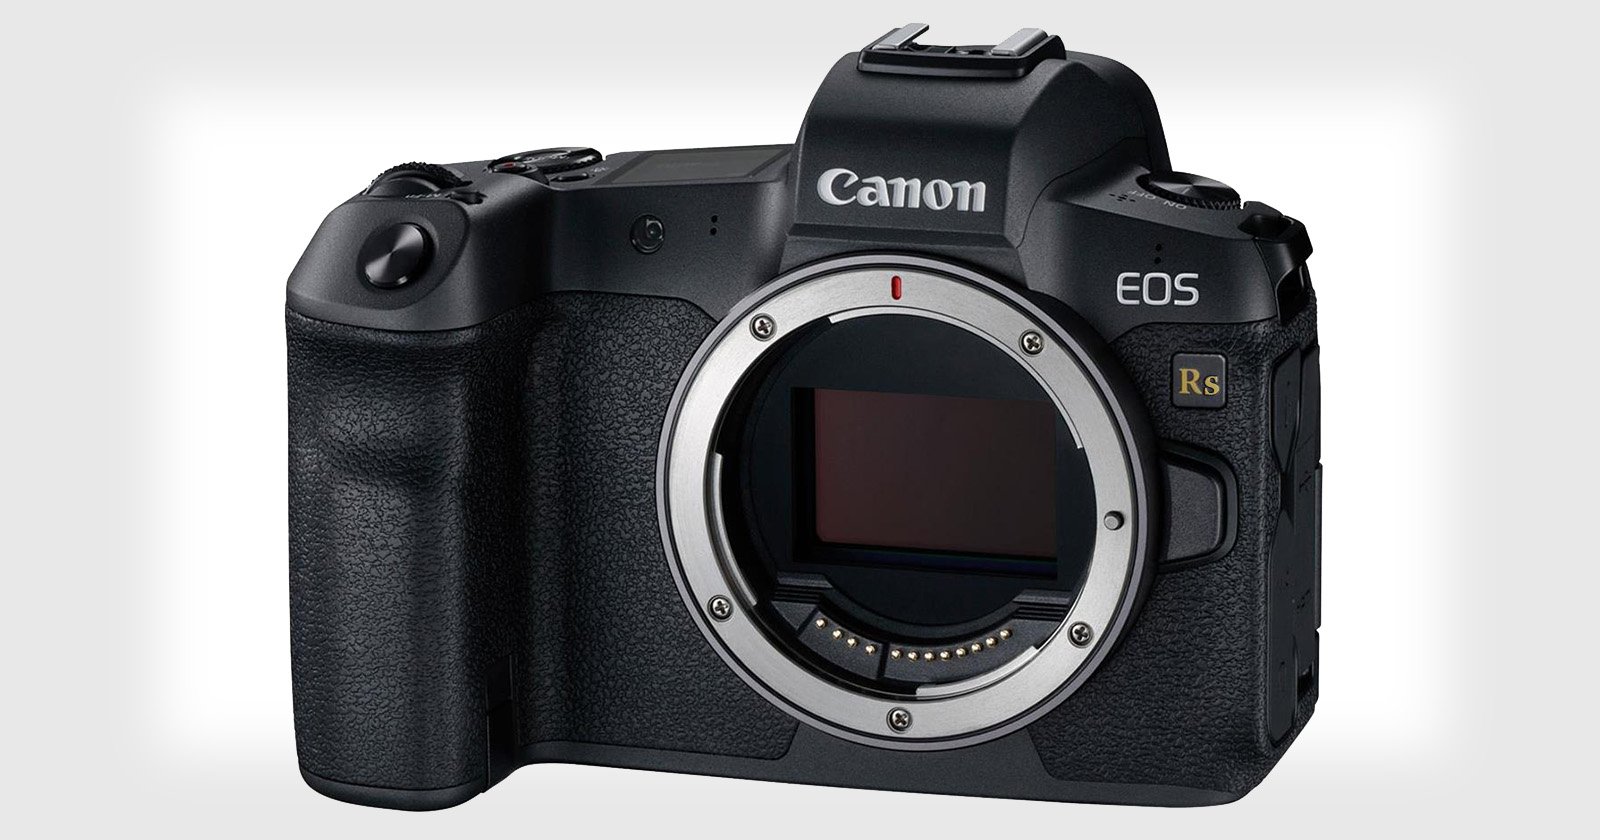  75mp canon eos dual card slots coming 